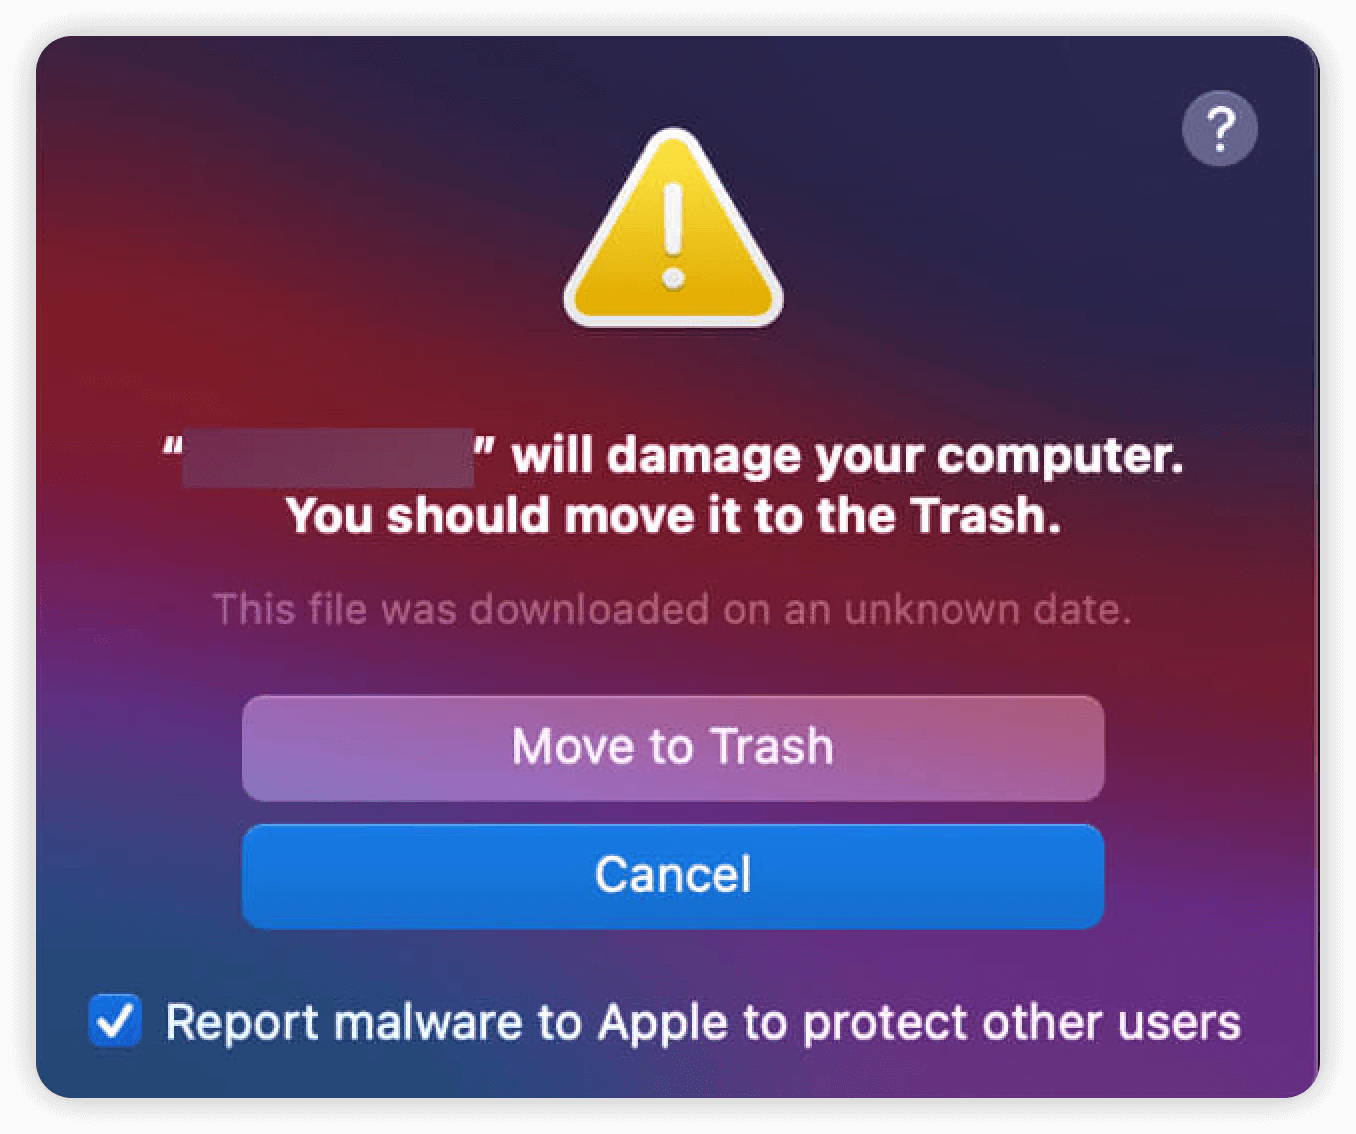 XProtect warning when it detects malware on Mac